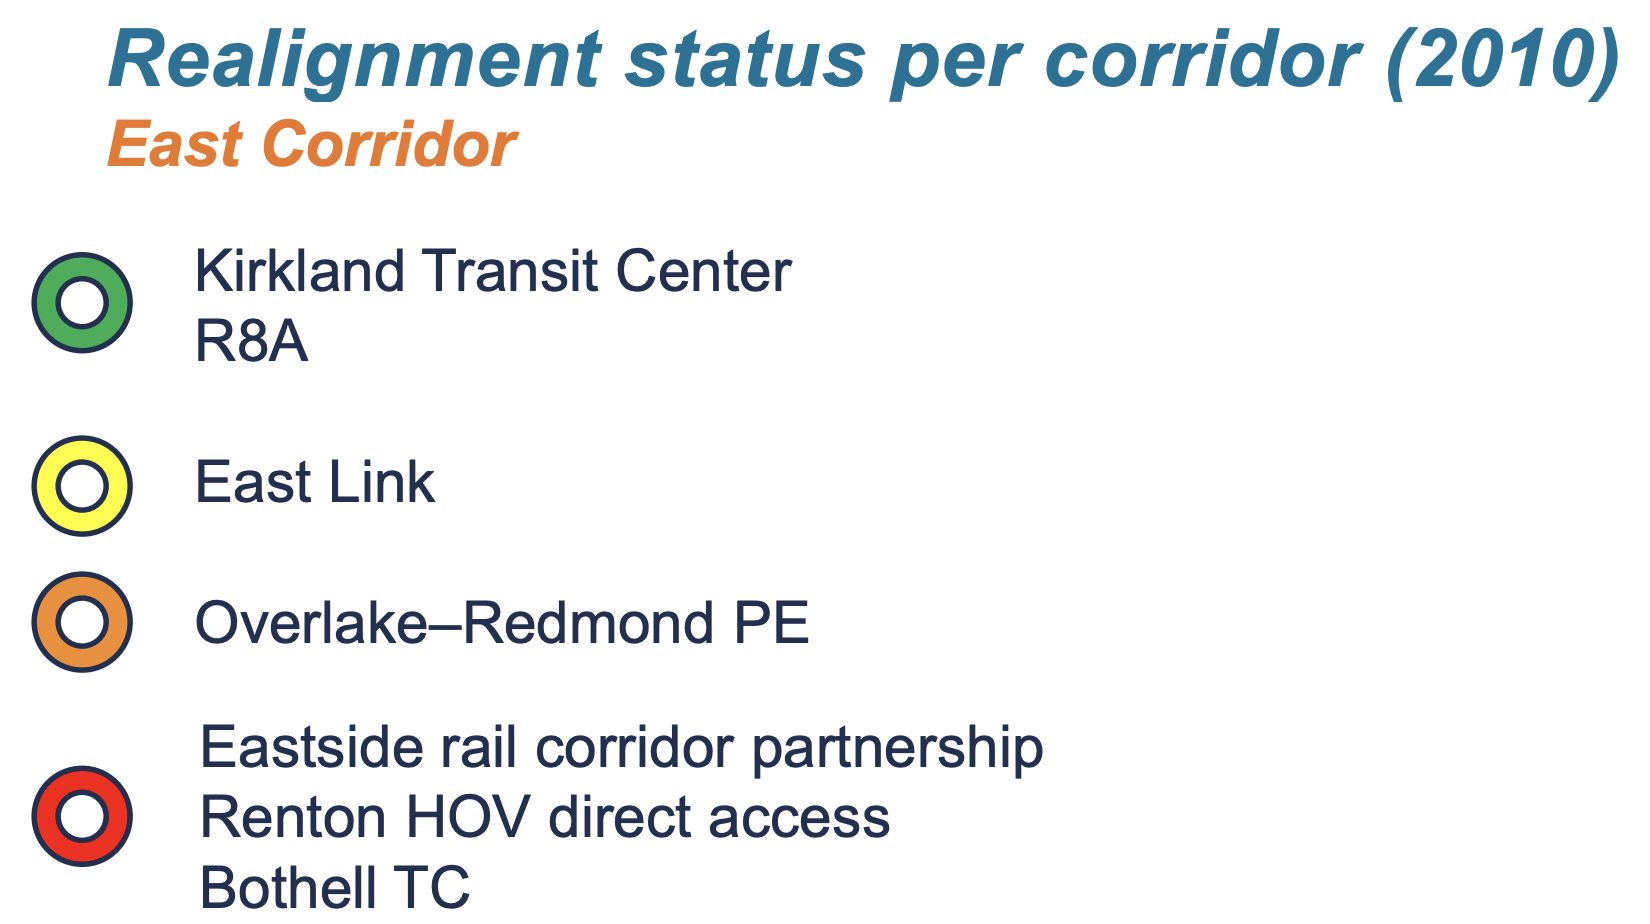 Realignment of projects in the East Corridor. (Sound Transit)